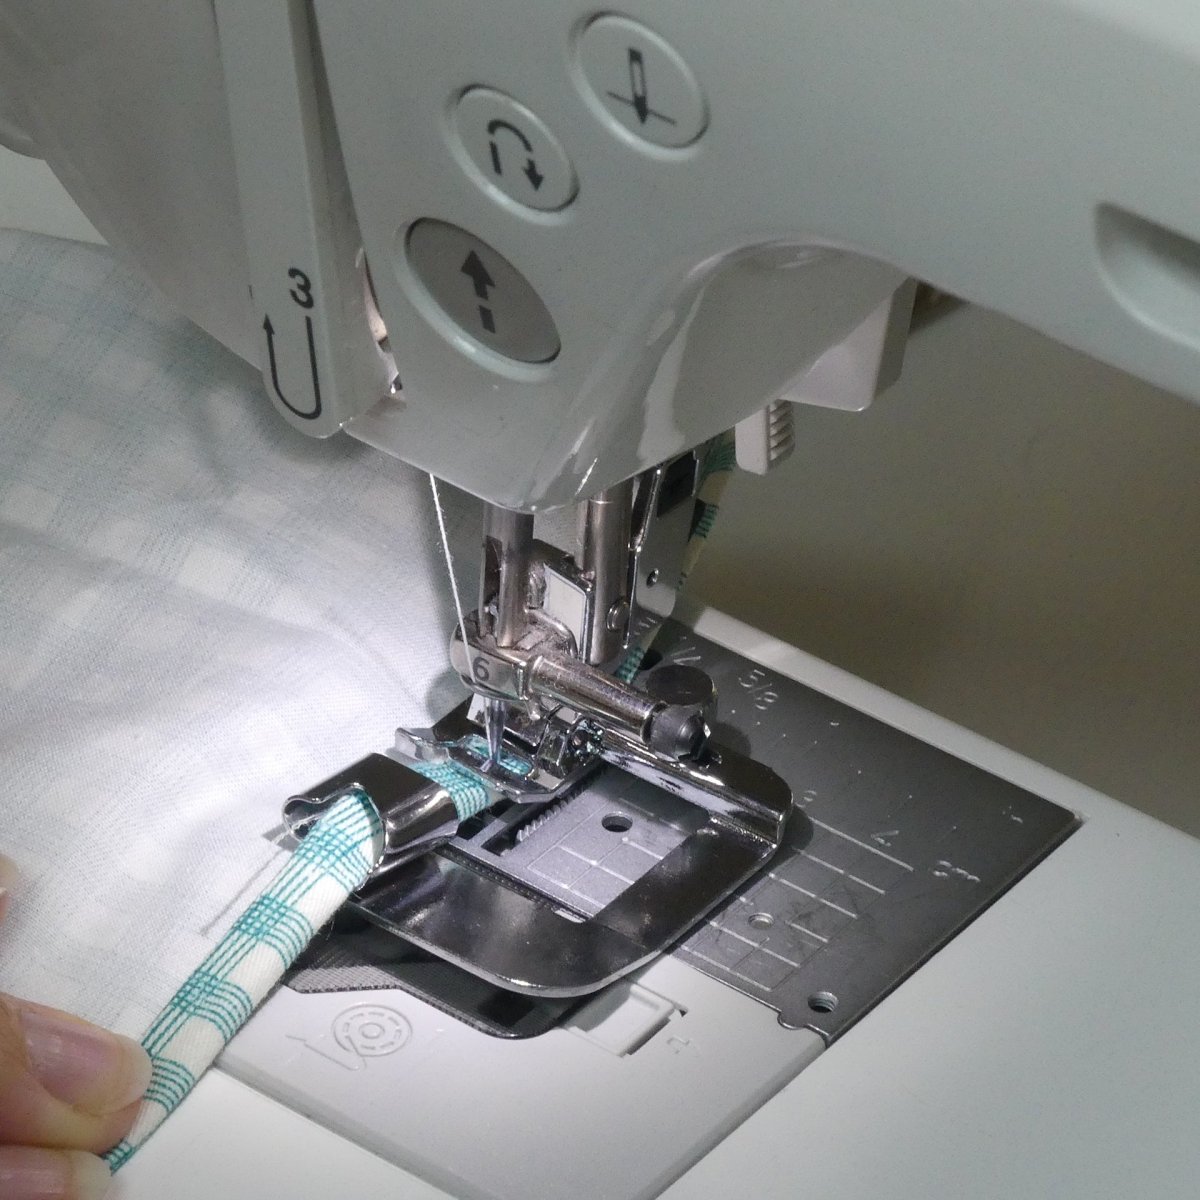 Sewing a hem with a Hemming presser foot on a sewing machine